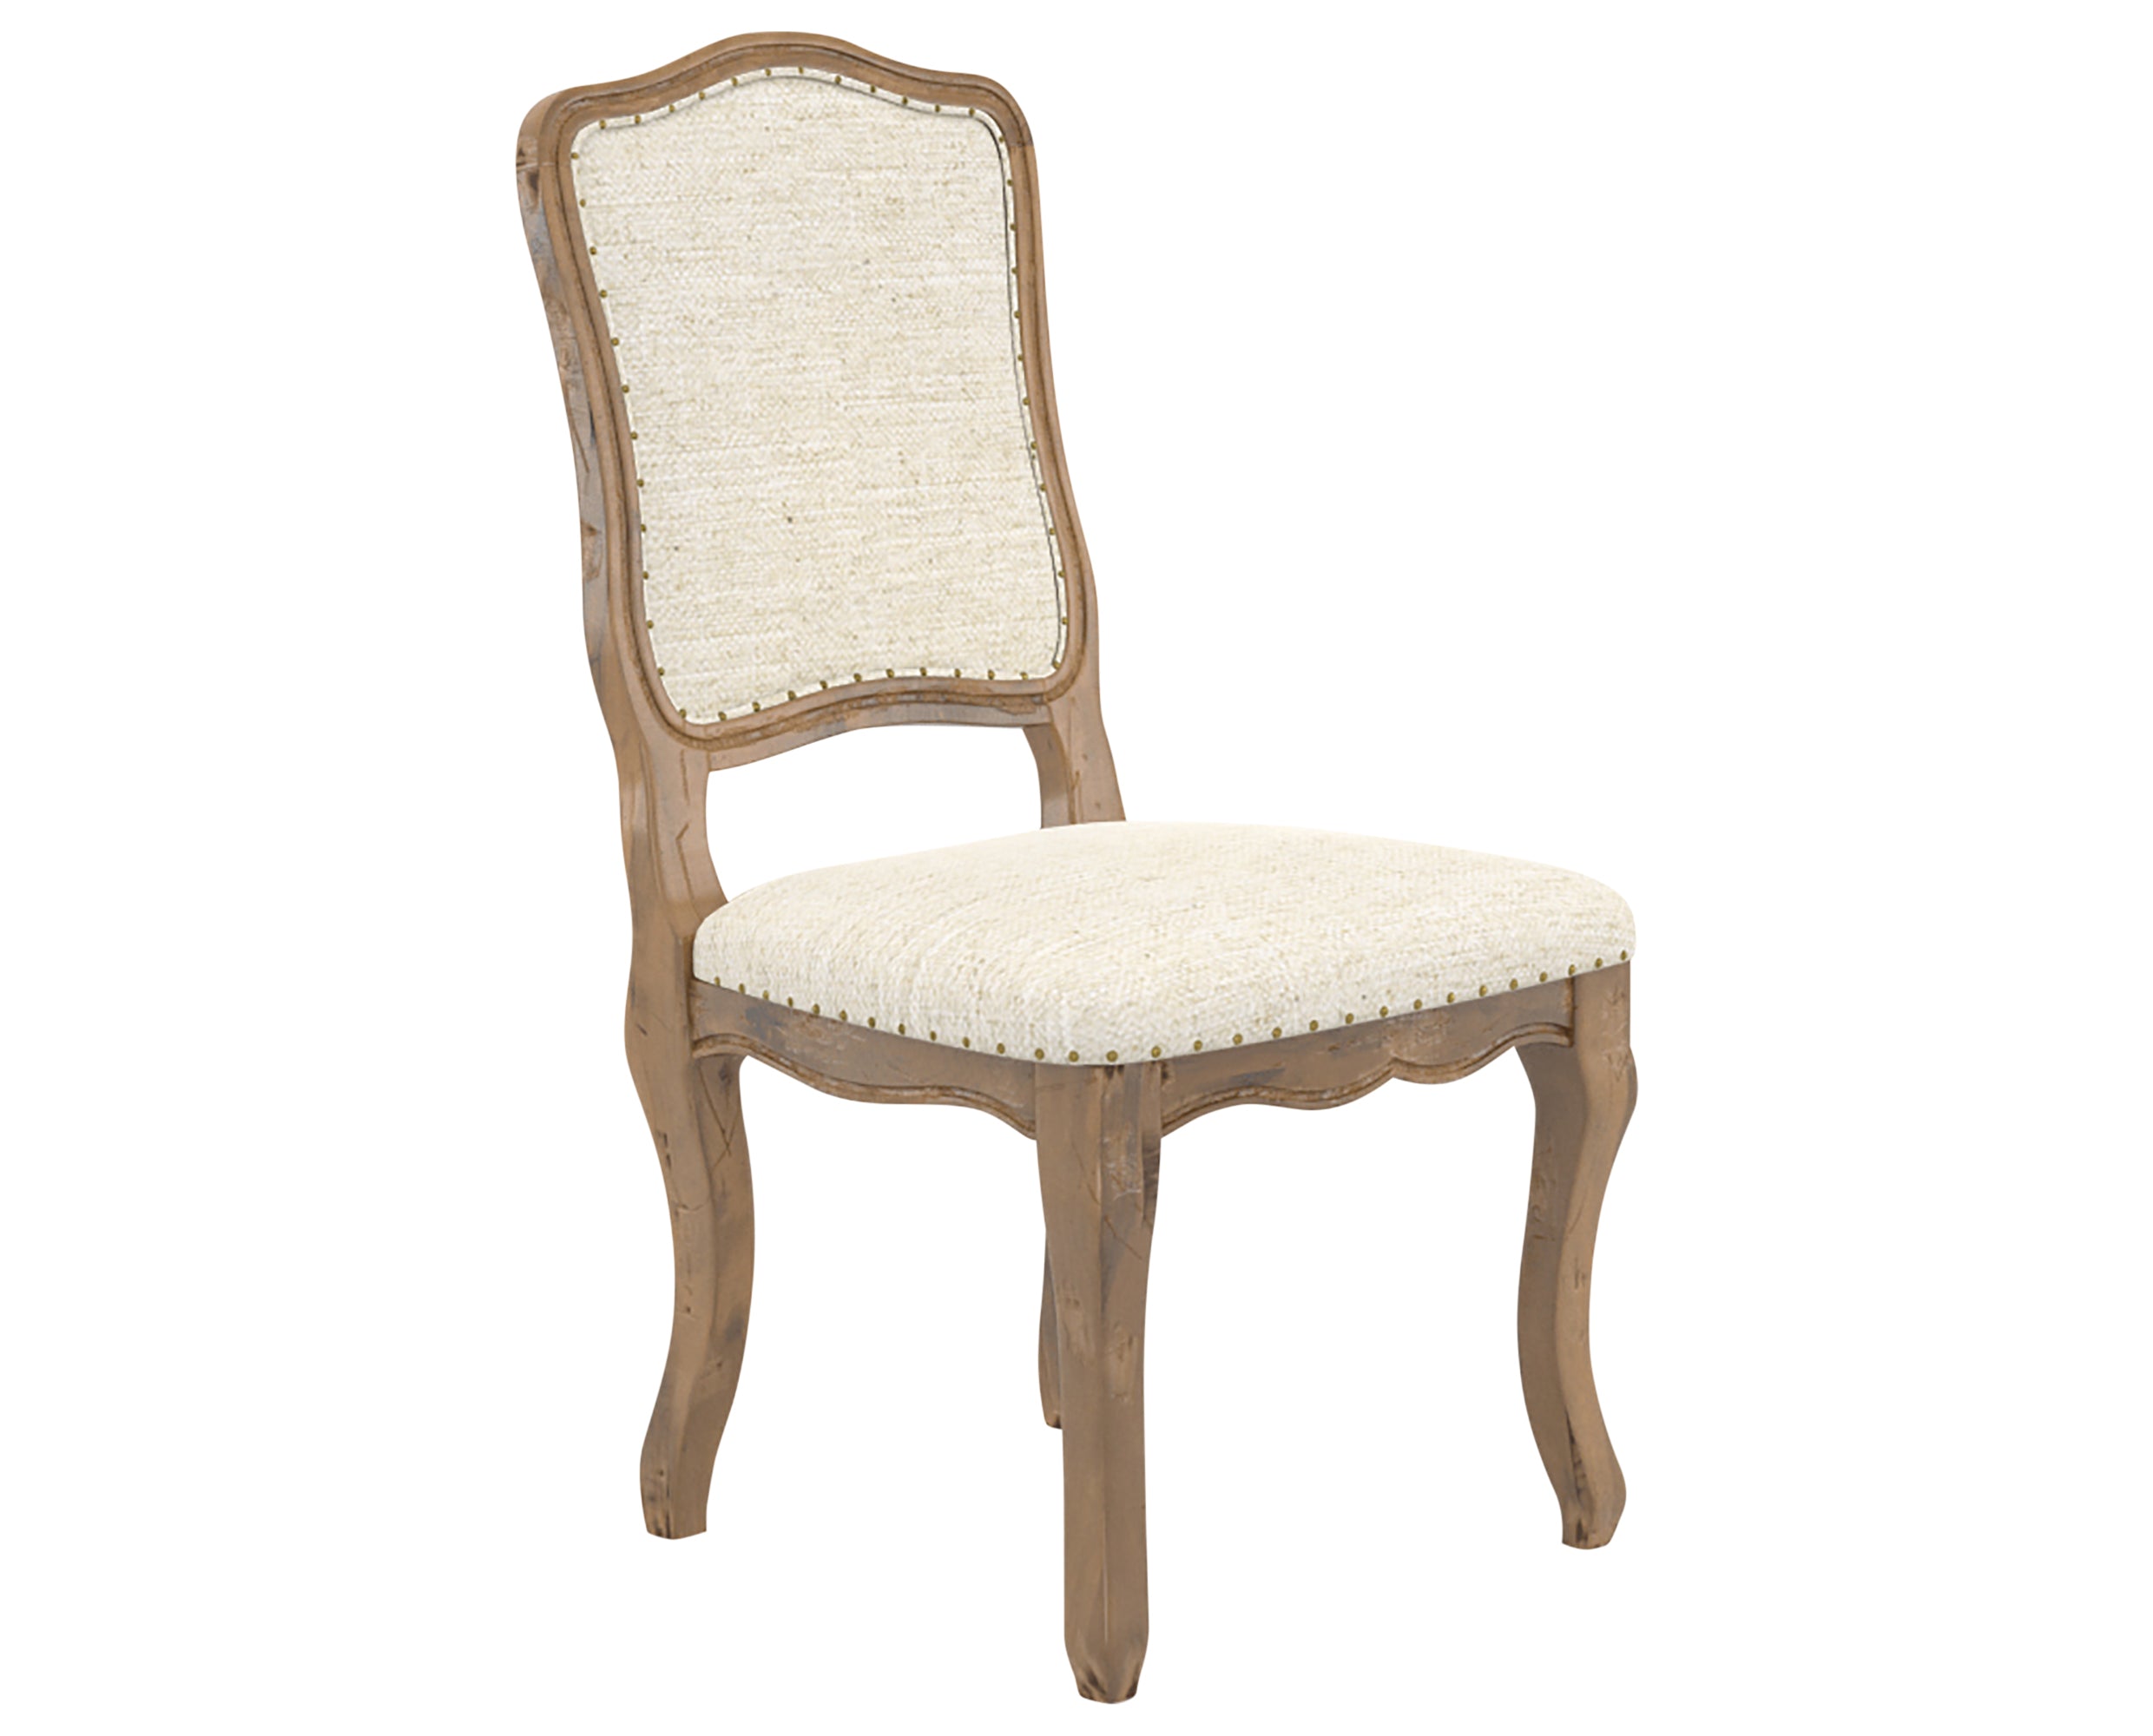 Oak Washed and Fabric TW with Antique Brass Nails | Canadel Champlain Dining Chair 316 | Valley Ridge Furniture